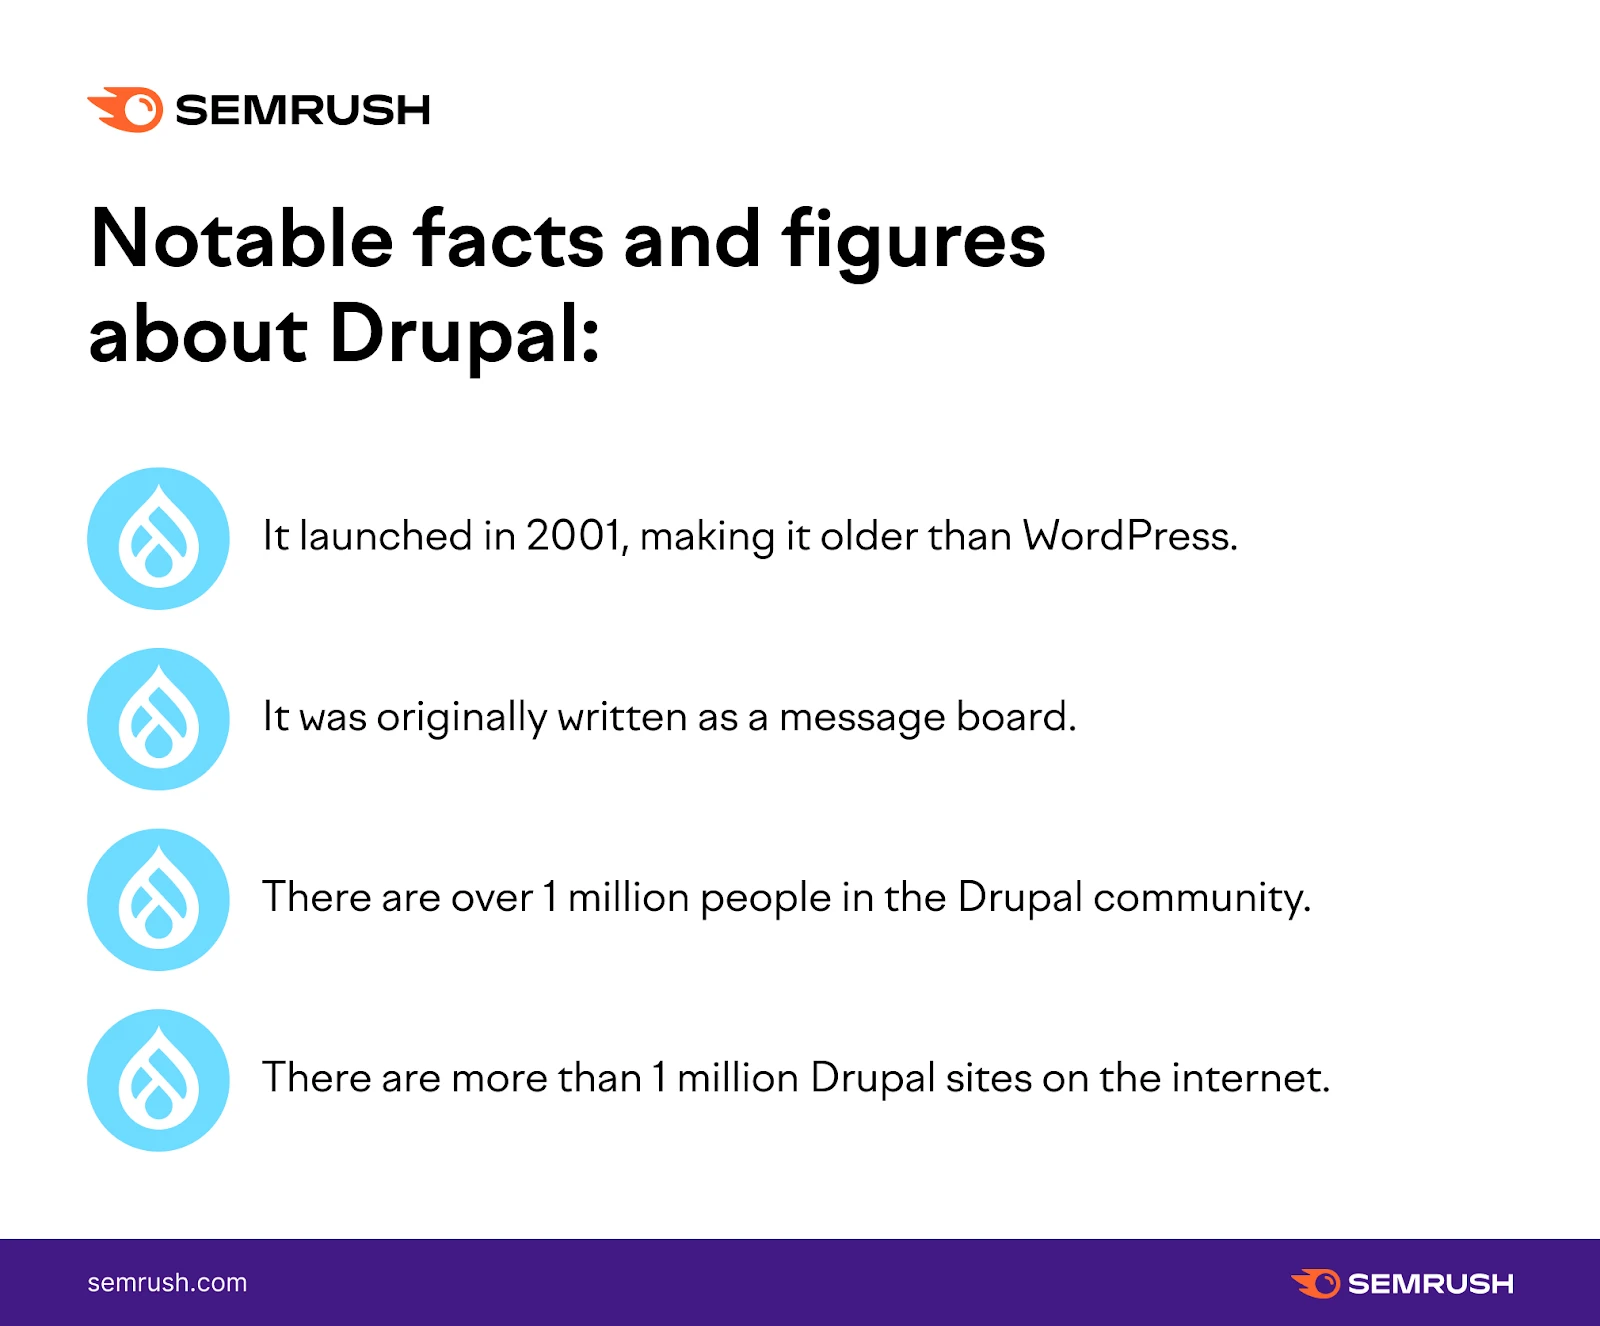 "Notable facts and figures about Drupal"